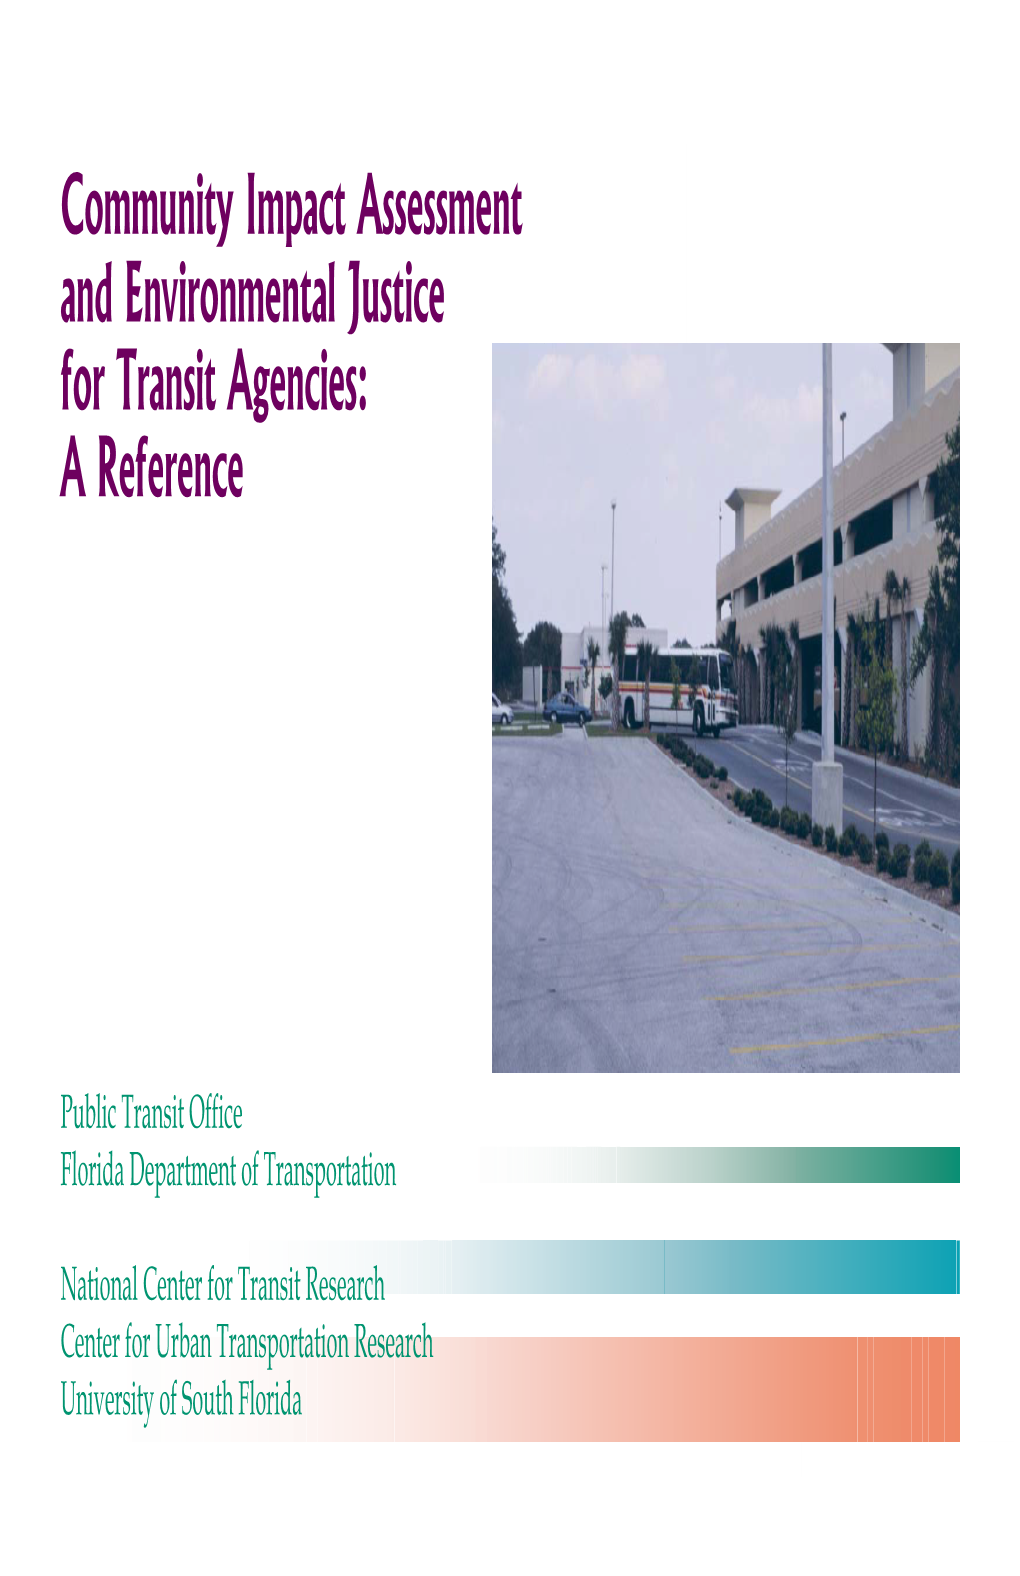 Community Impact Assessment and Environmental Justice for Transit Agencies: a Reference